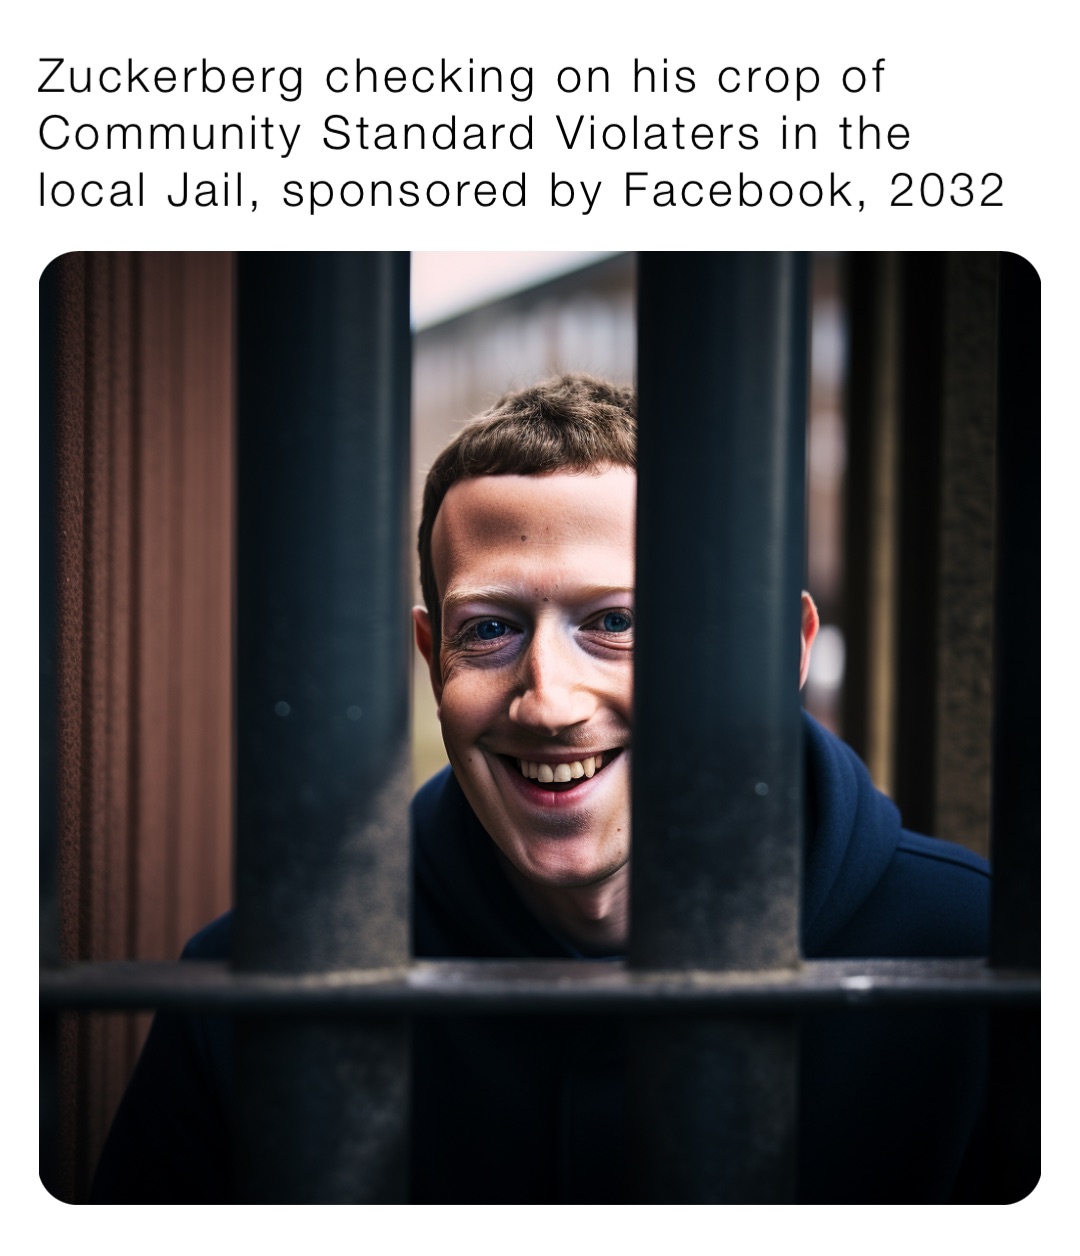 Zuckerberg checking on his crop of Community Standard Violaters in the local Jail, sponsored by Facebook, 2032